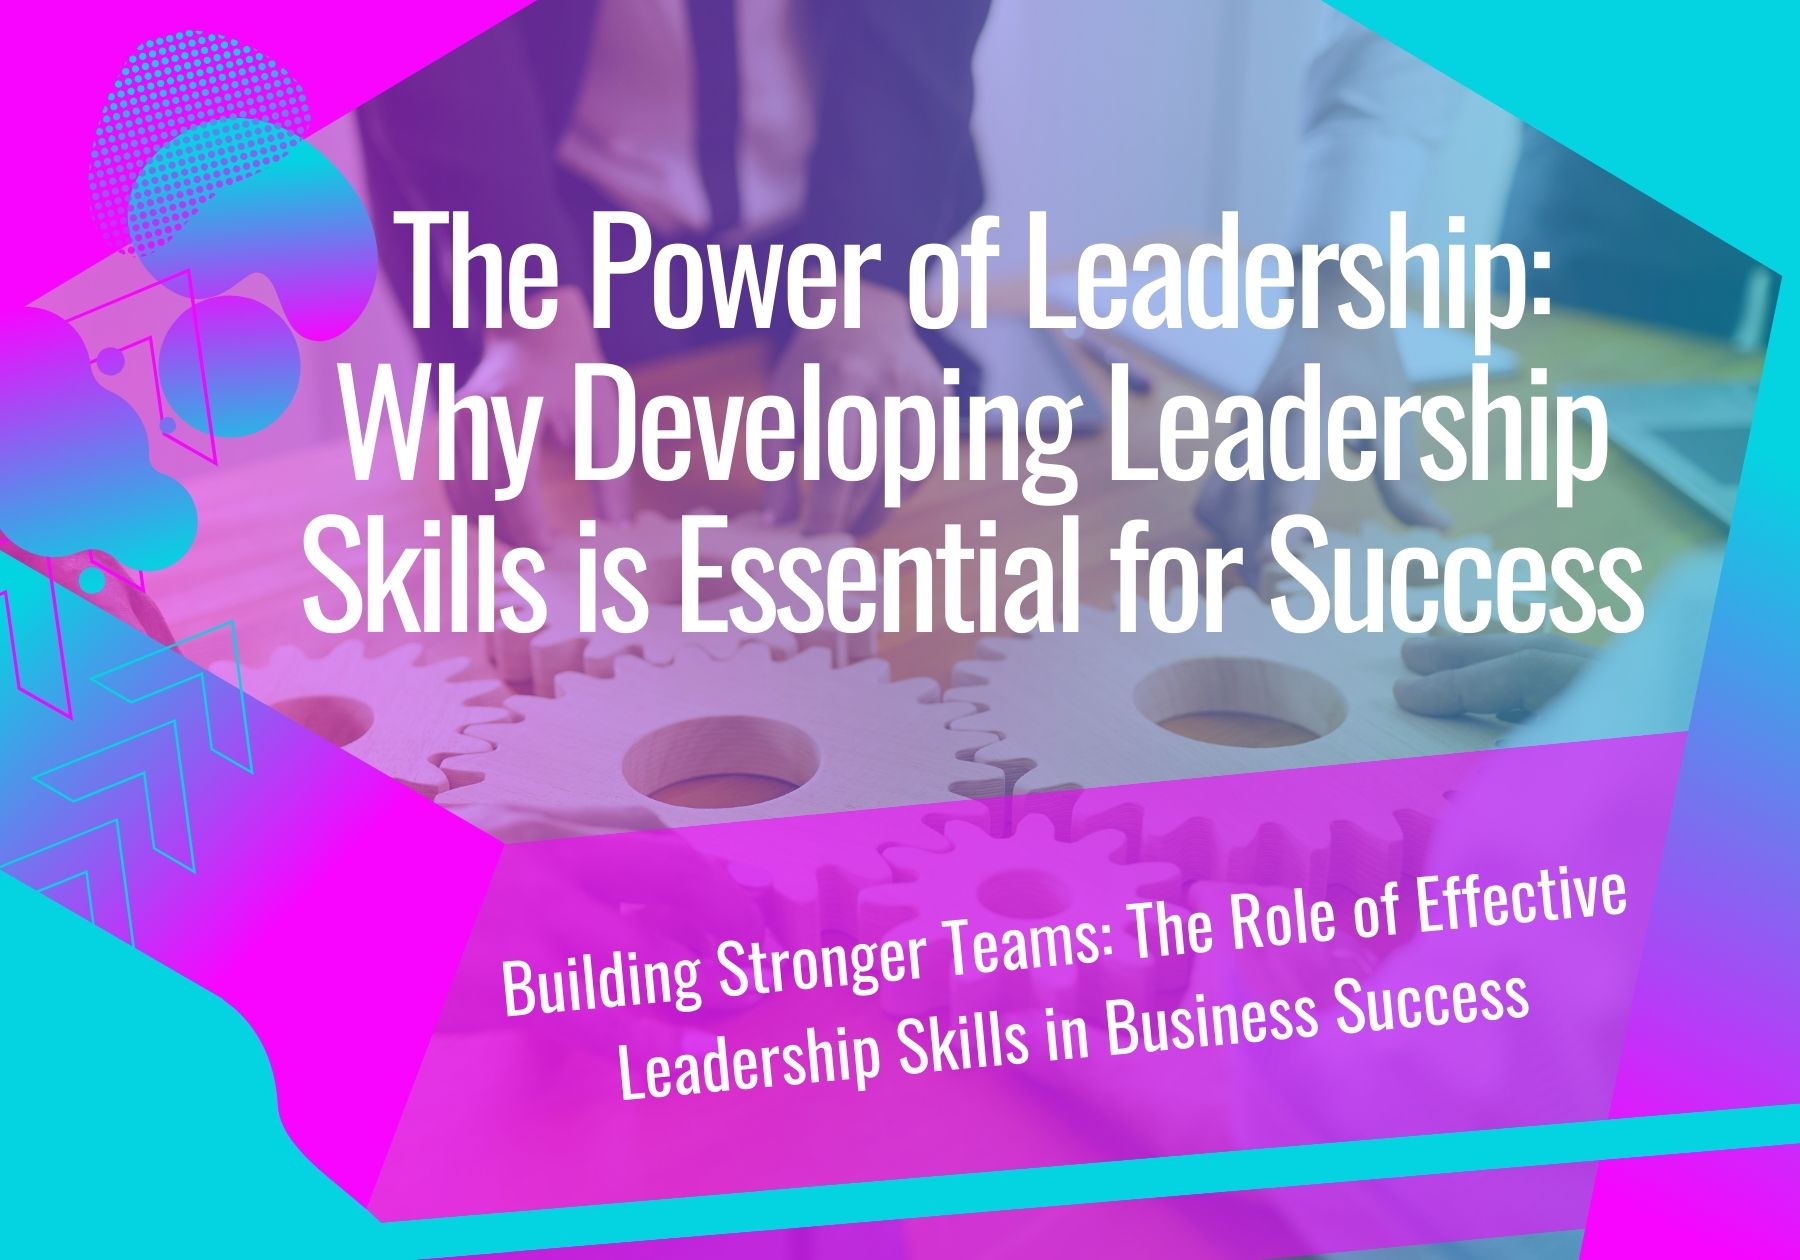 The Power of Leadership: Why Developing Leadership Skills is Essential for Success